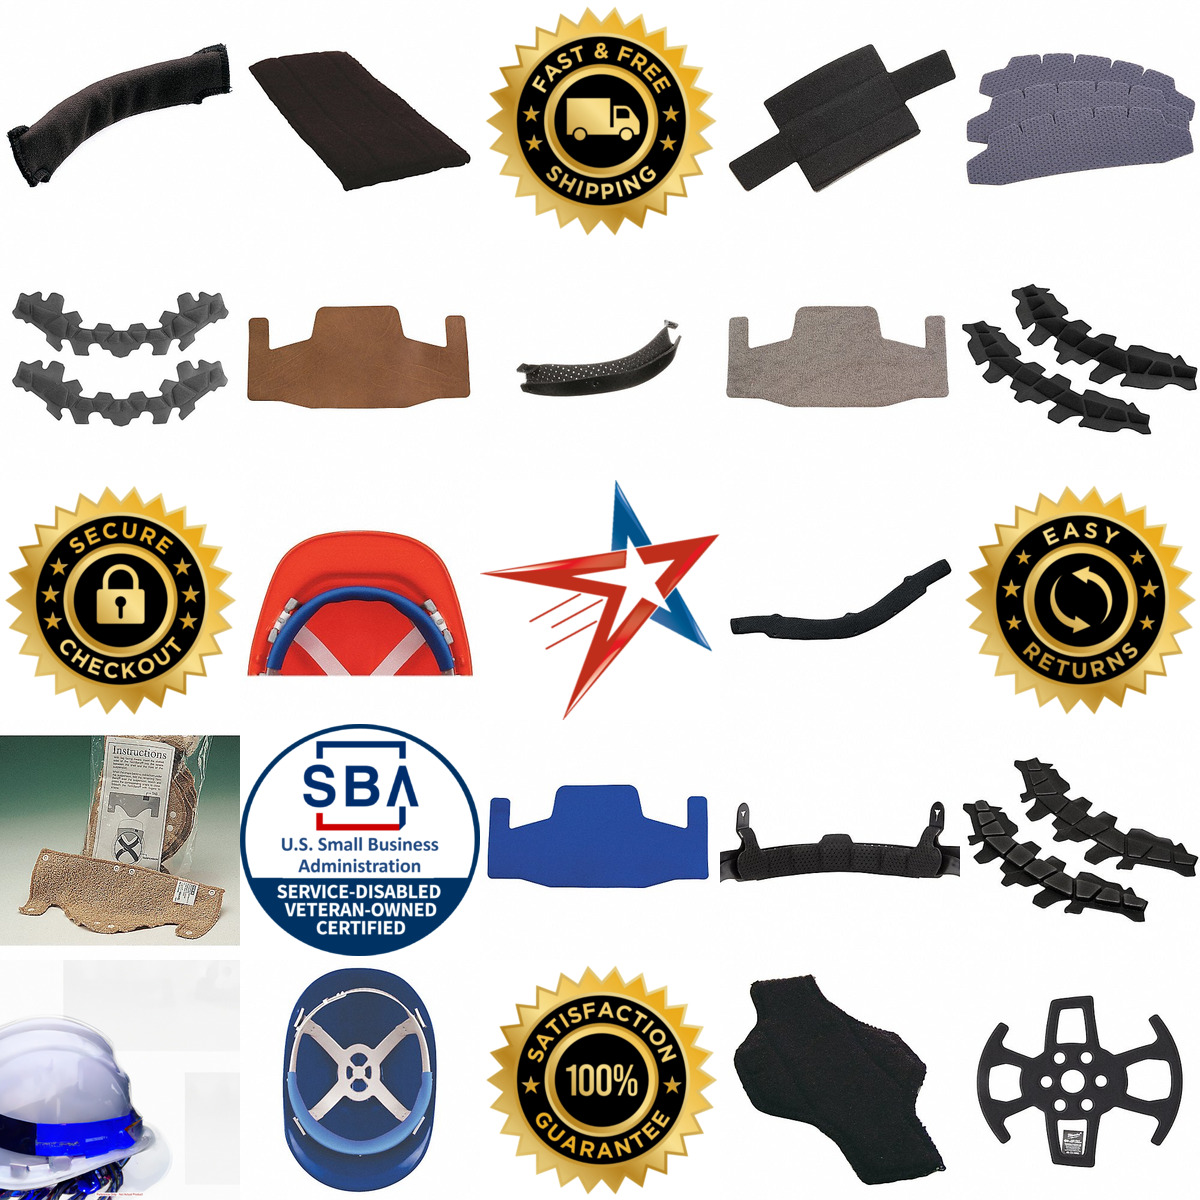 A selection of Hard Hat Sweatbands products on GoVets